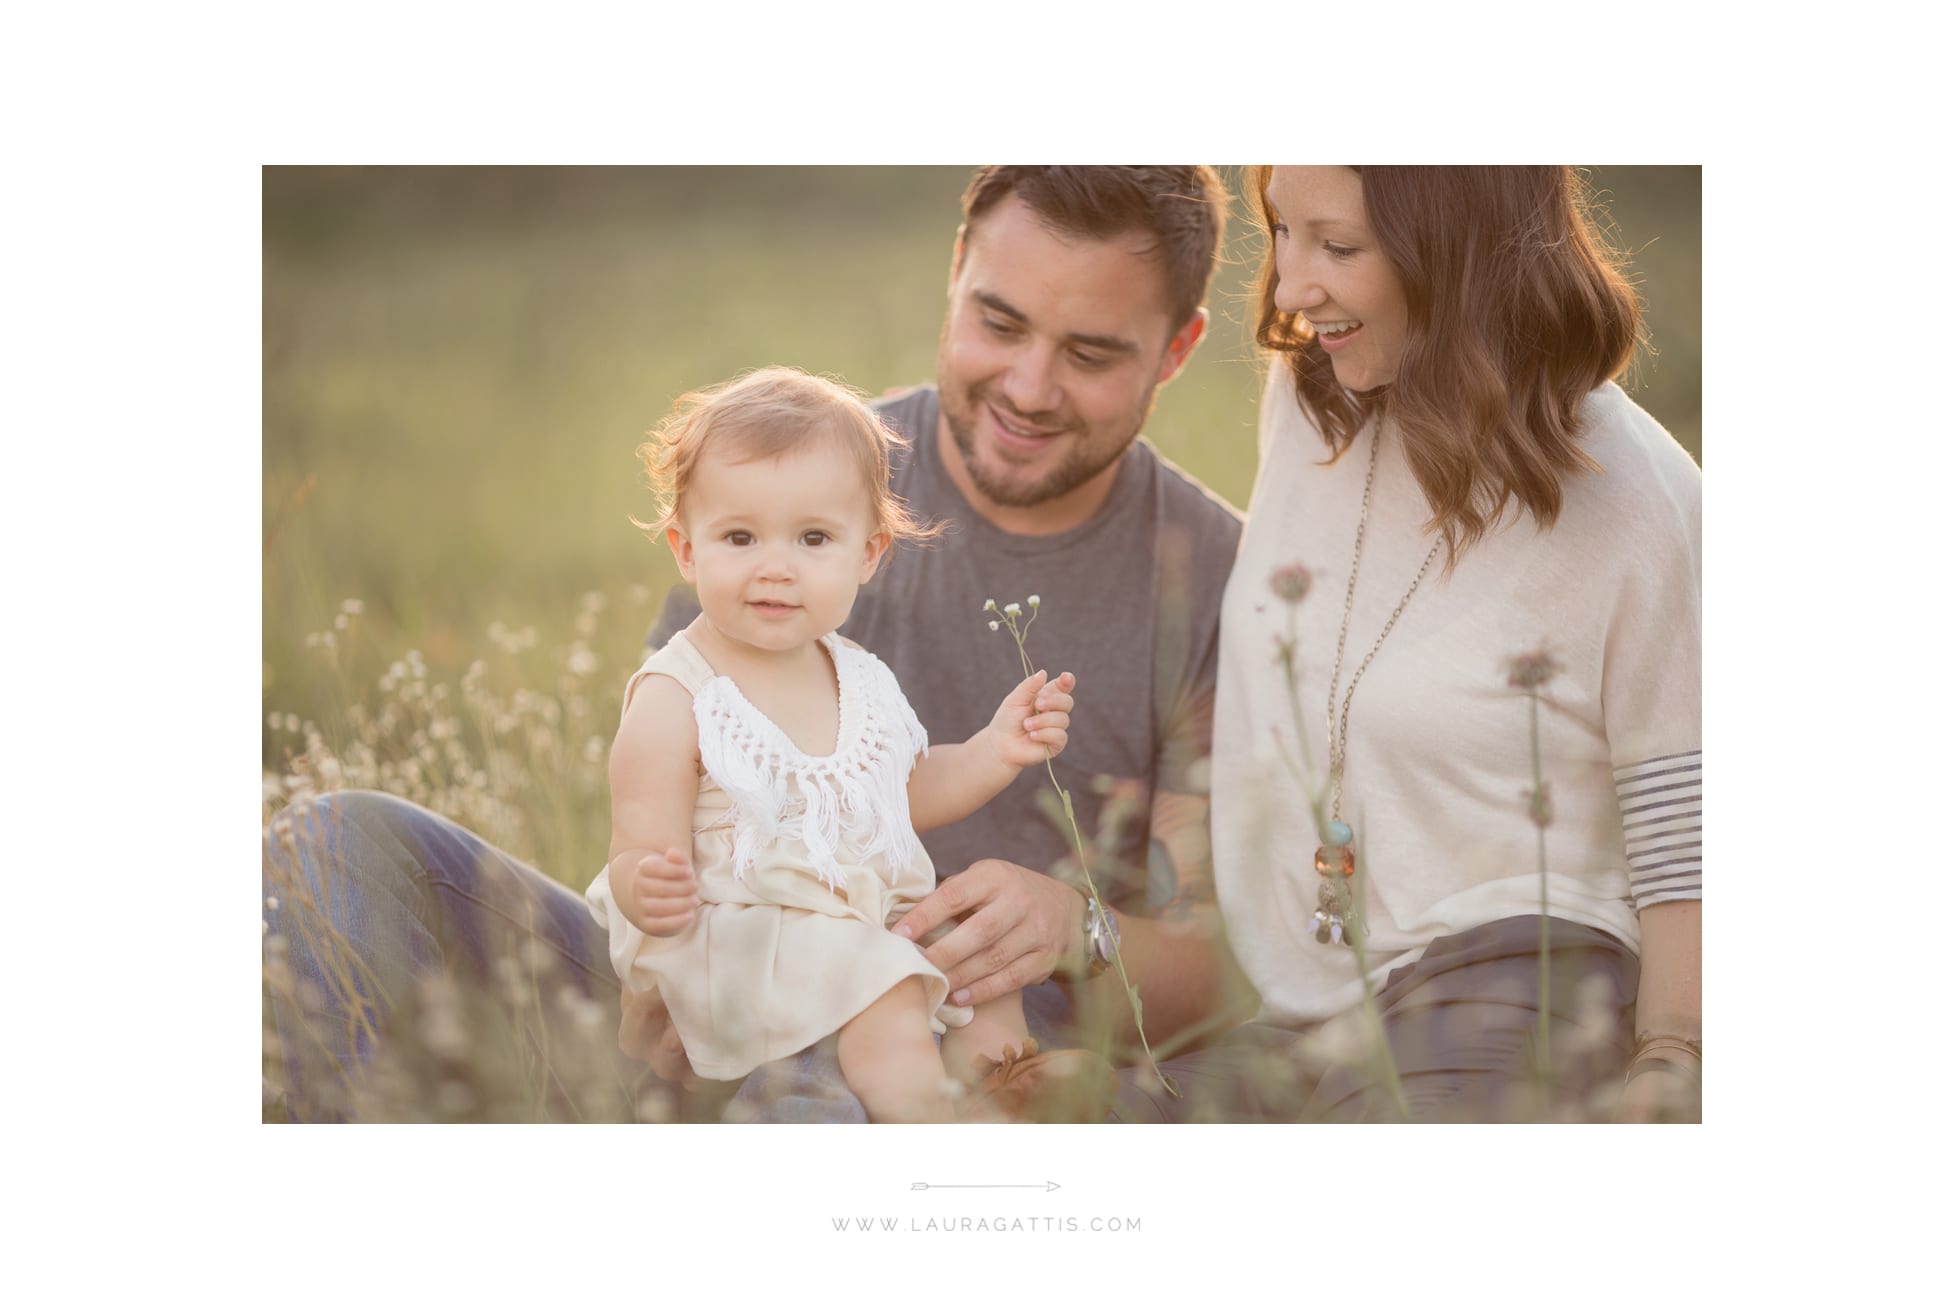 natural light field family session | laura gattis photography